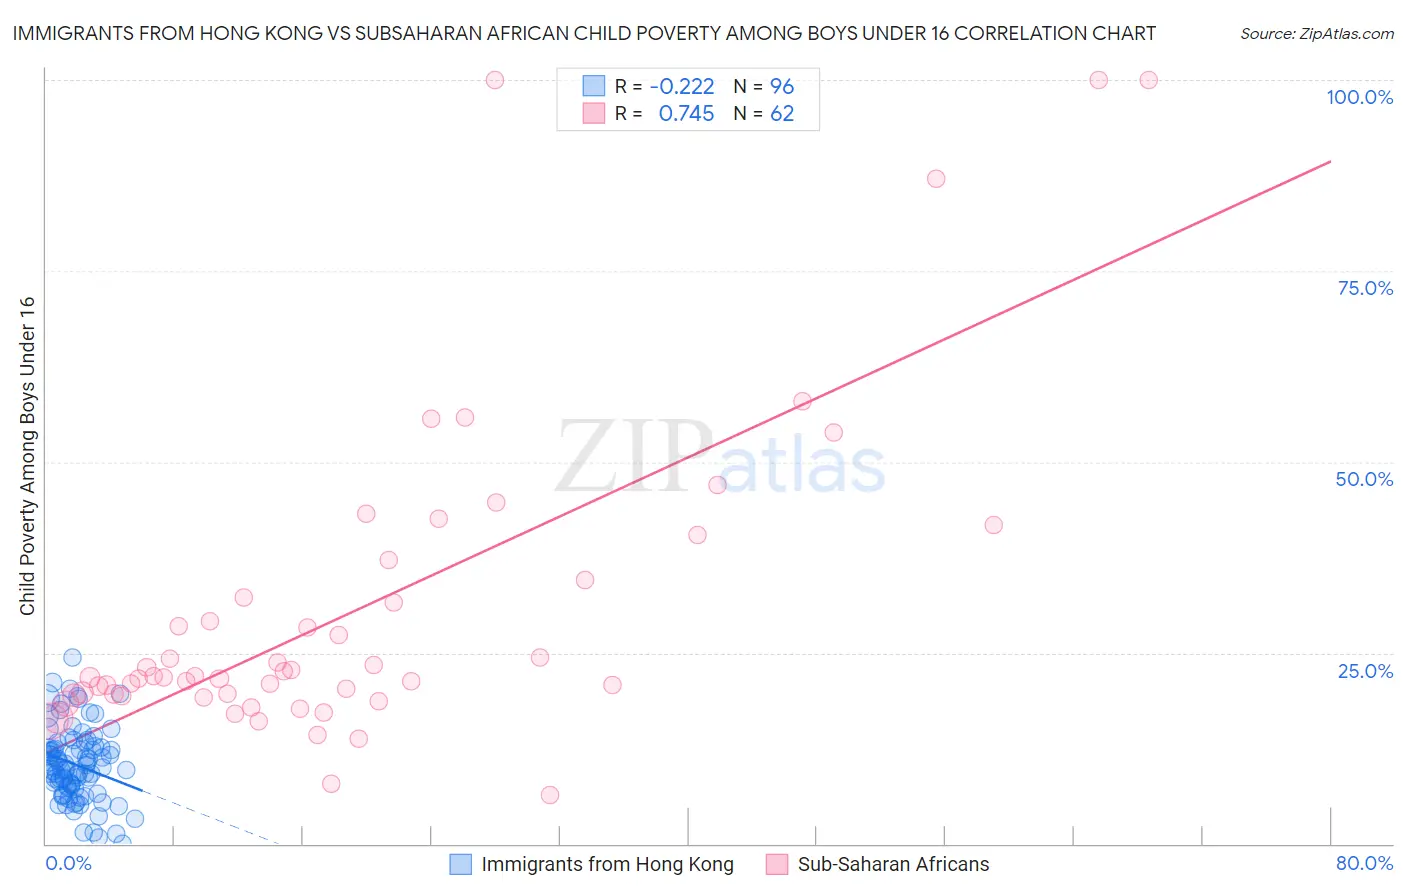 Immigrants from Hong Kong vs Subsaharan African Child Poverty Among Boys Under 16